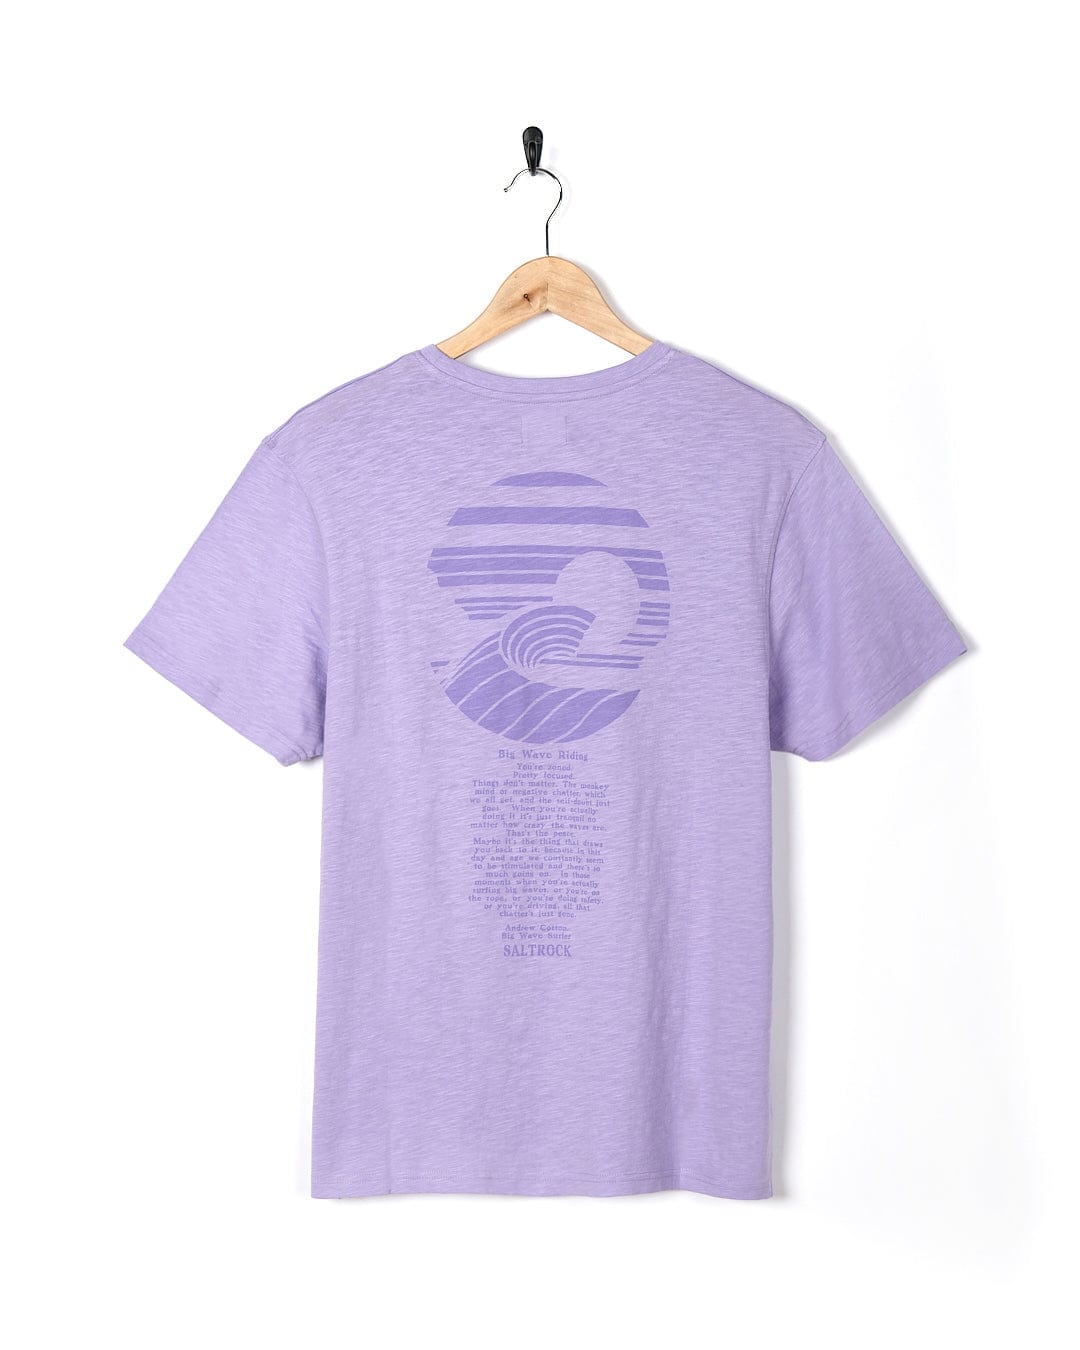 A Saltrock Atlantic - Mens Short Sleeve T-Shirt - Purple with an image of a wave on it.